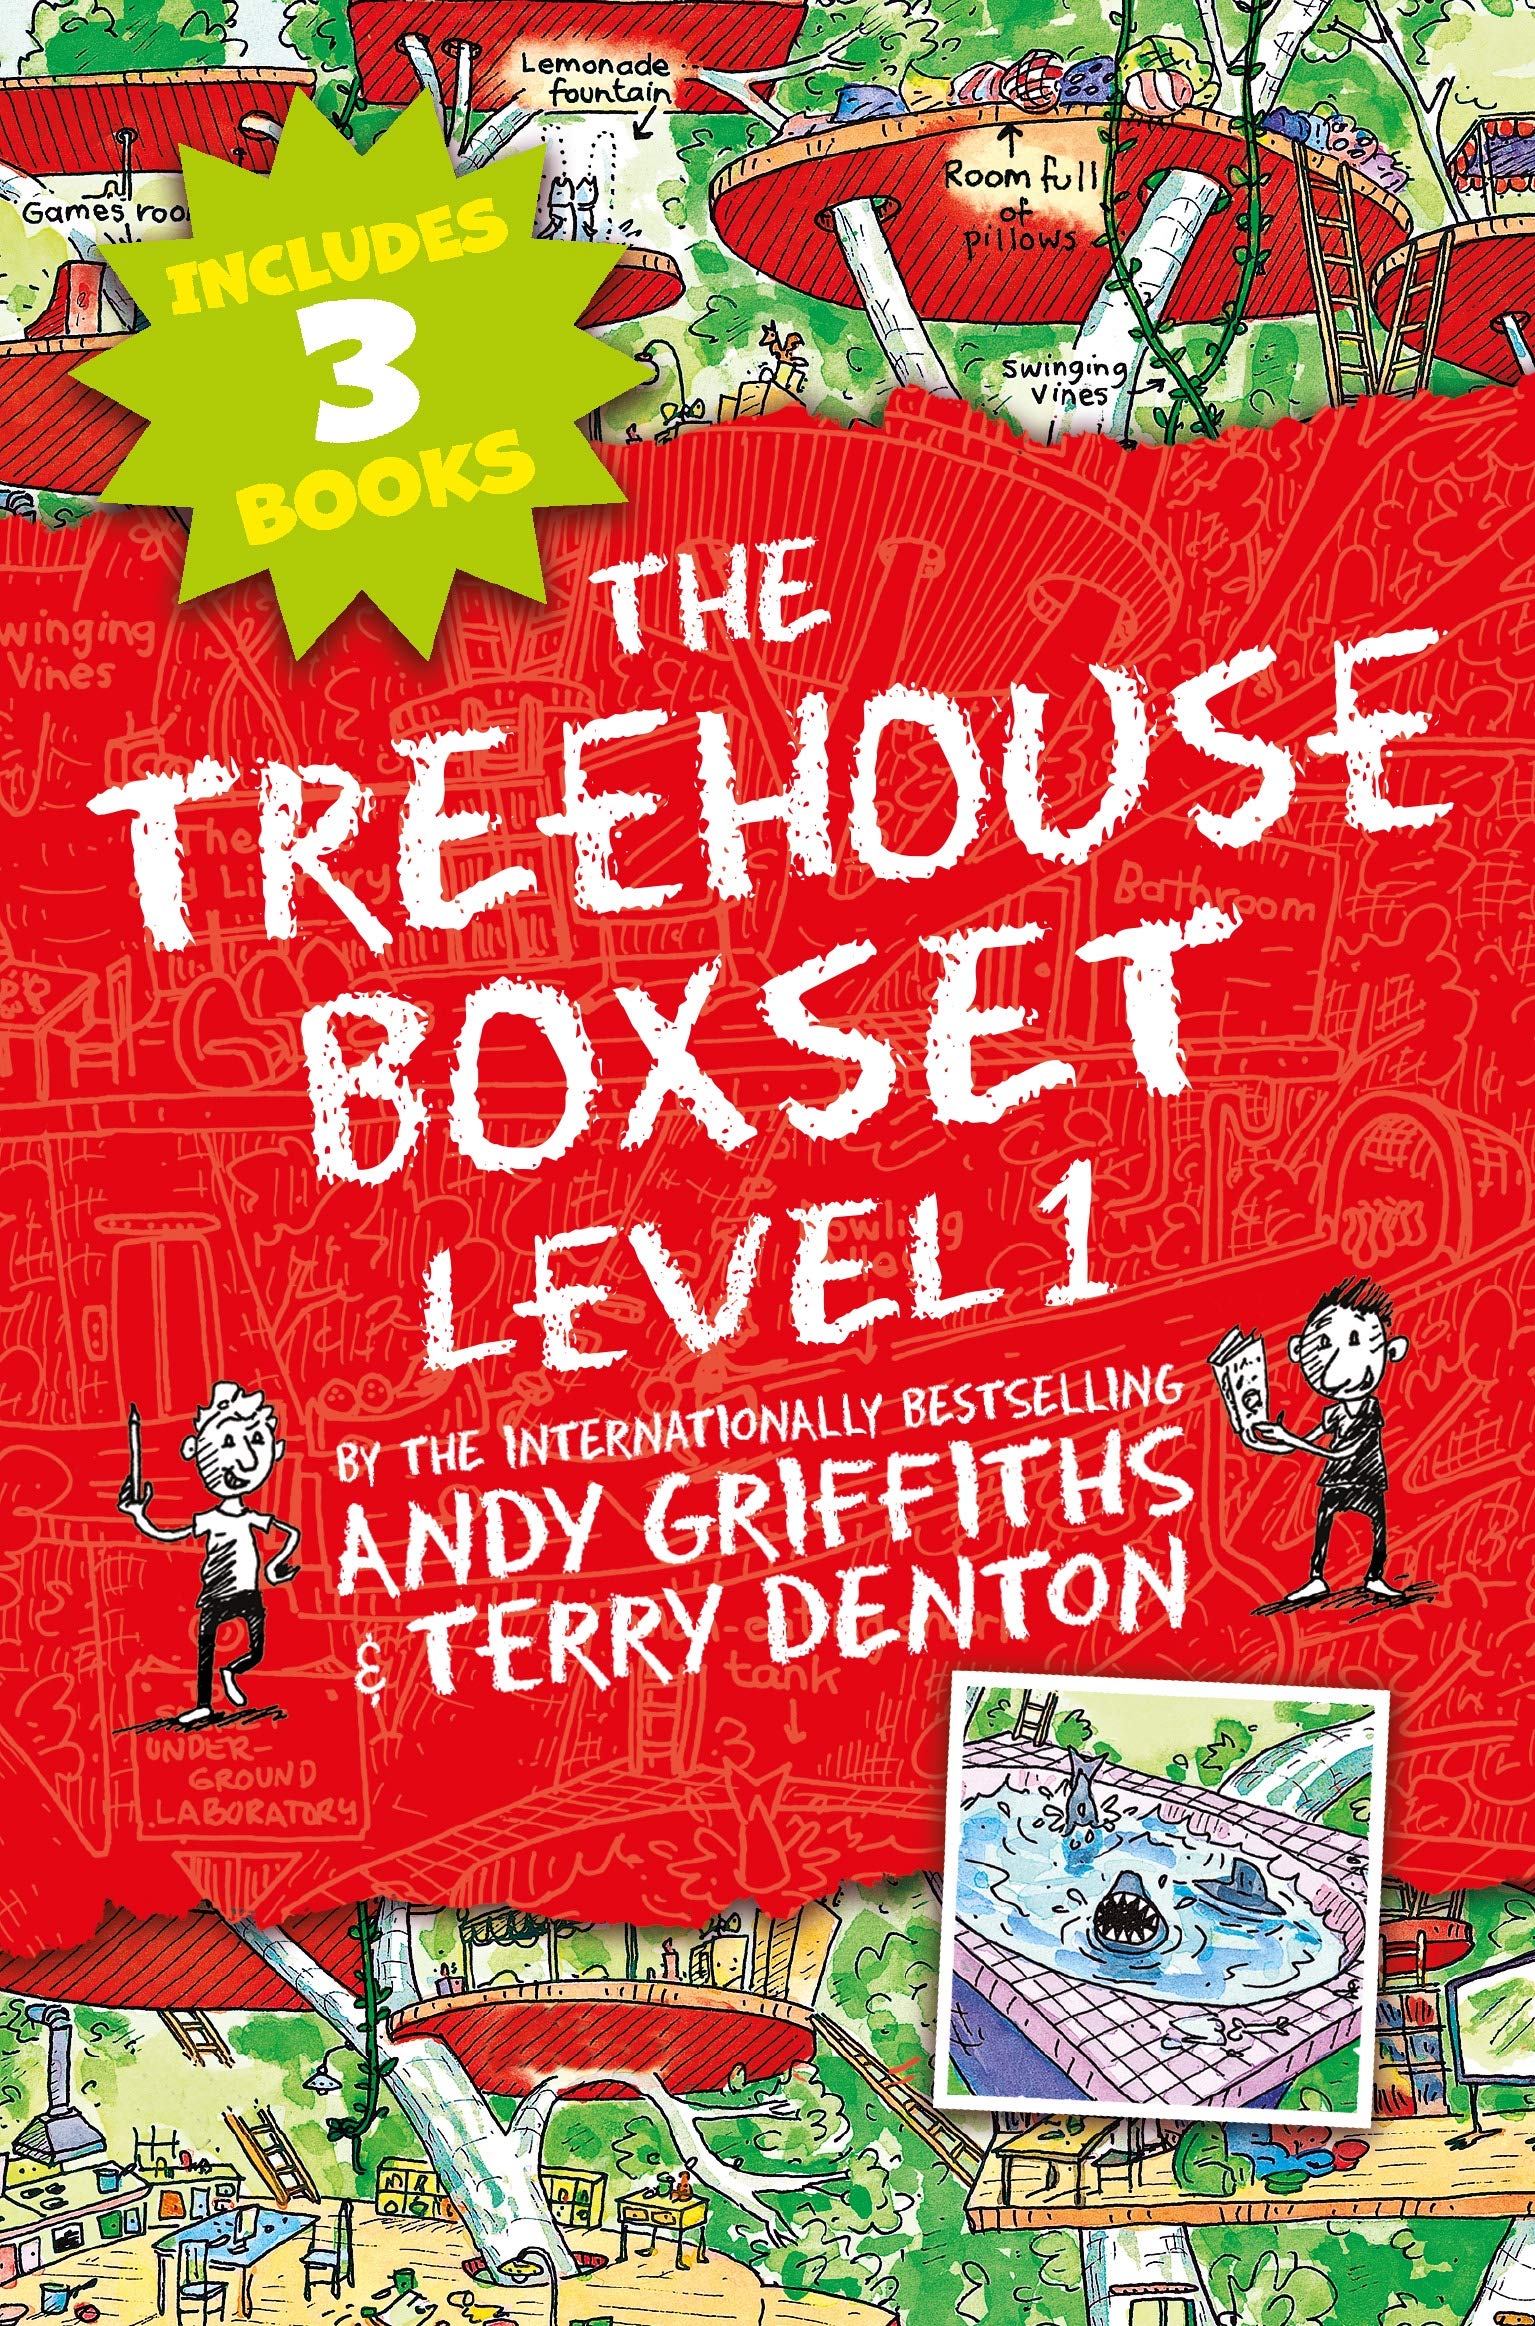 The Treehouse Boxset - Level 1 | Andy Griffiths